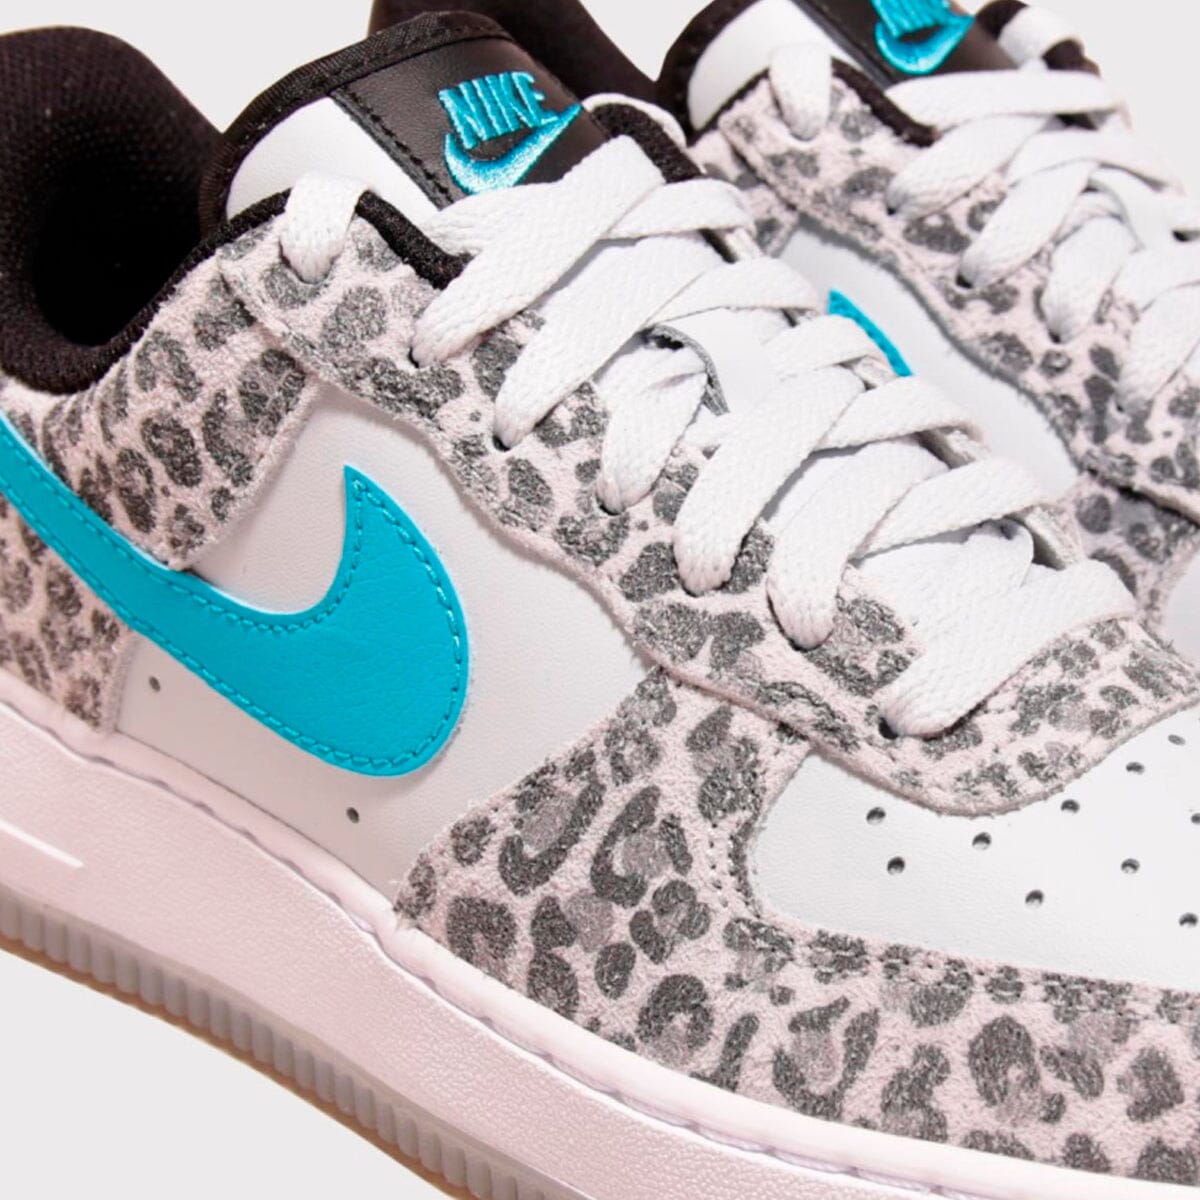 Nike Air Force 1 Low Leopard Air Force 1 Blizz Sneakers 